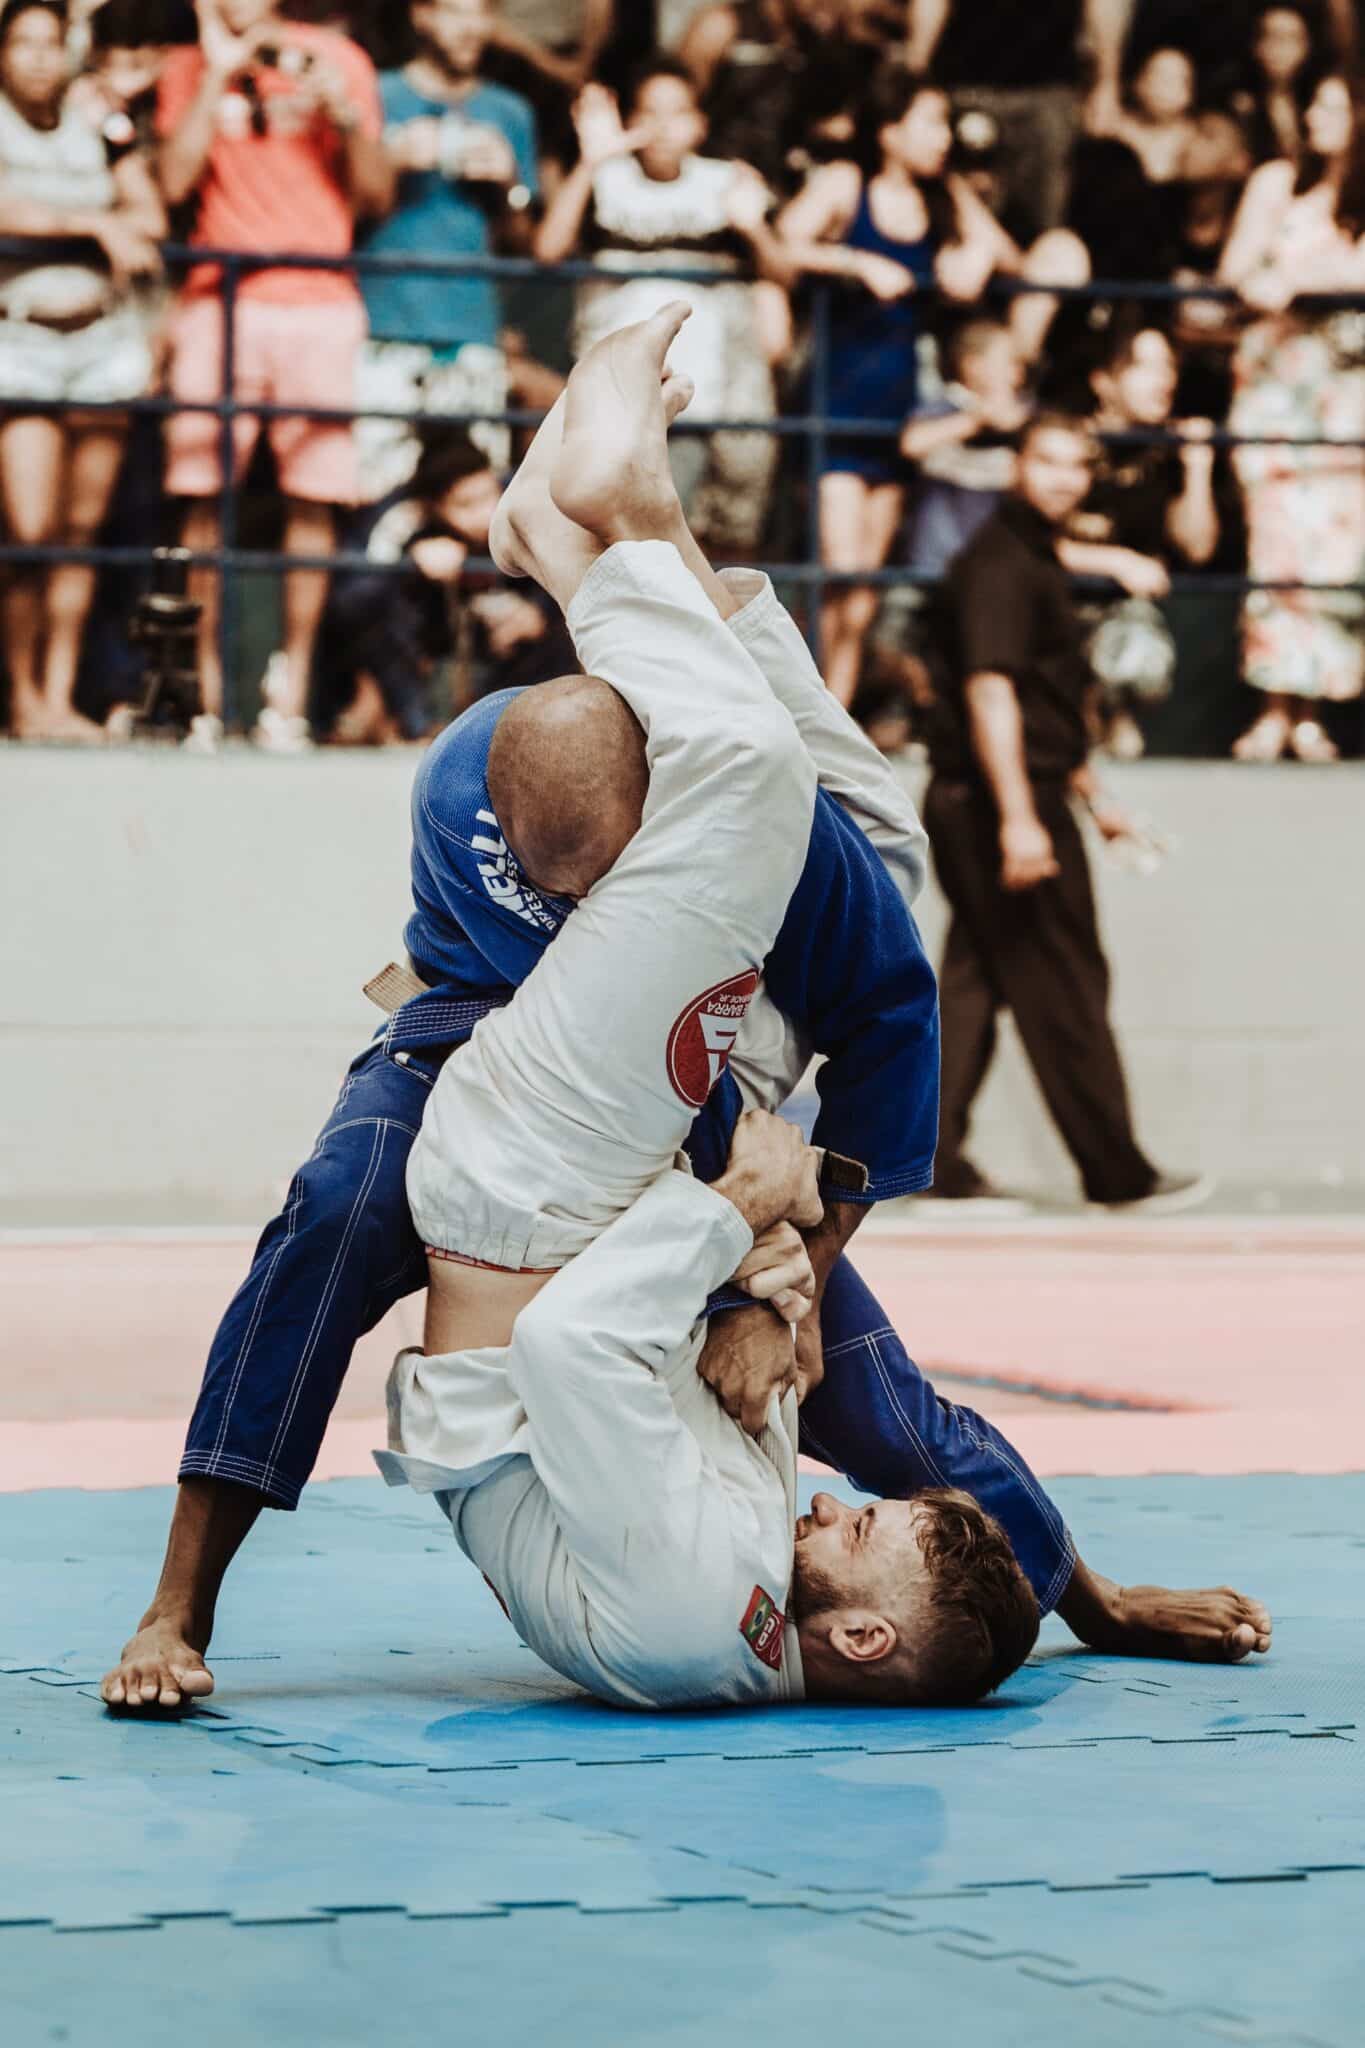 A man performs an armbar against another man.